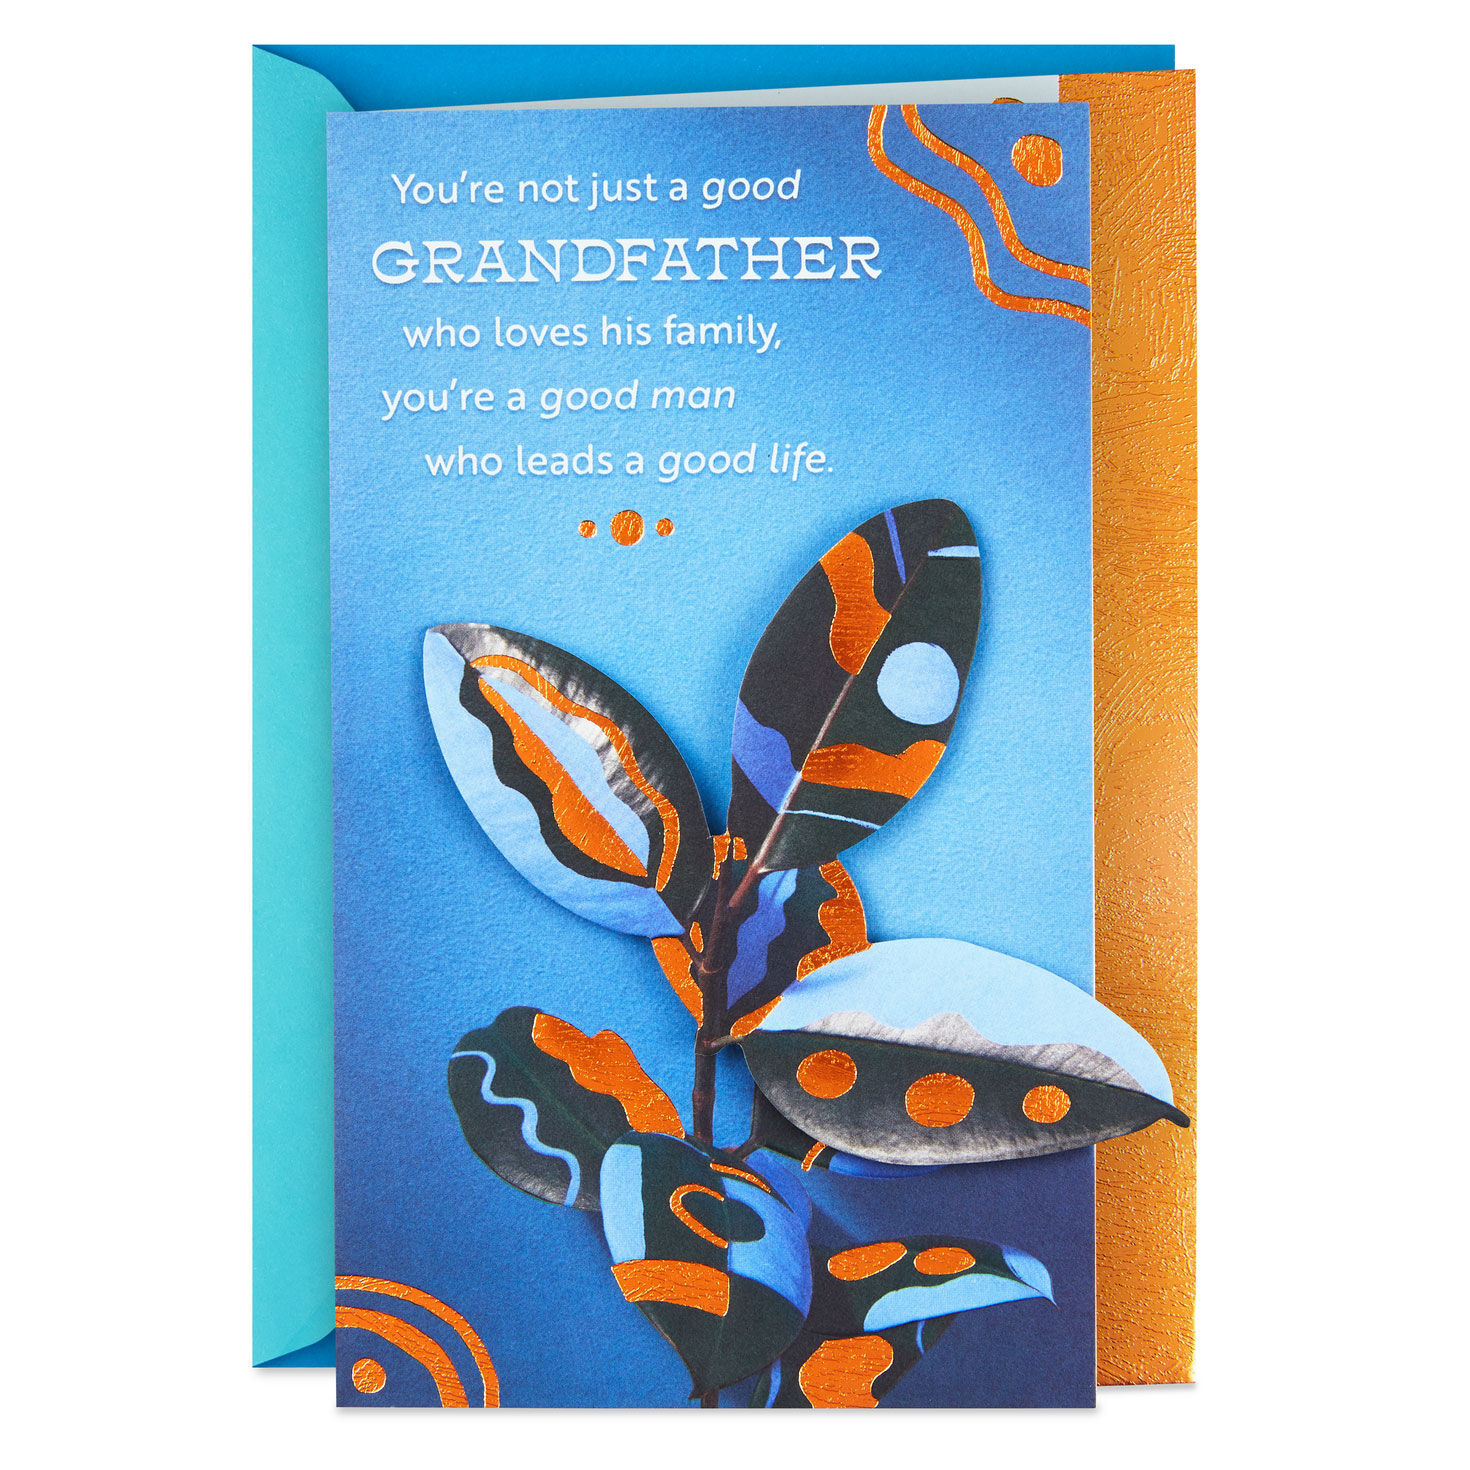 A Good Man Who Leads a Good Life Birthday Card for Grandfather for only USD 5.99 | Hallmark